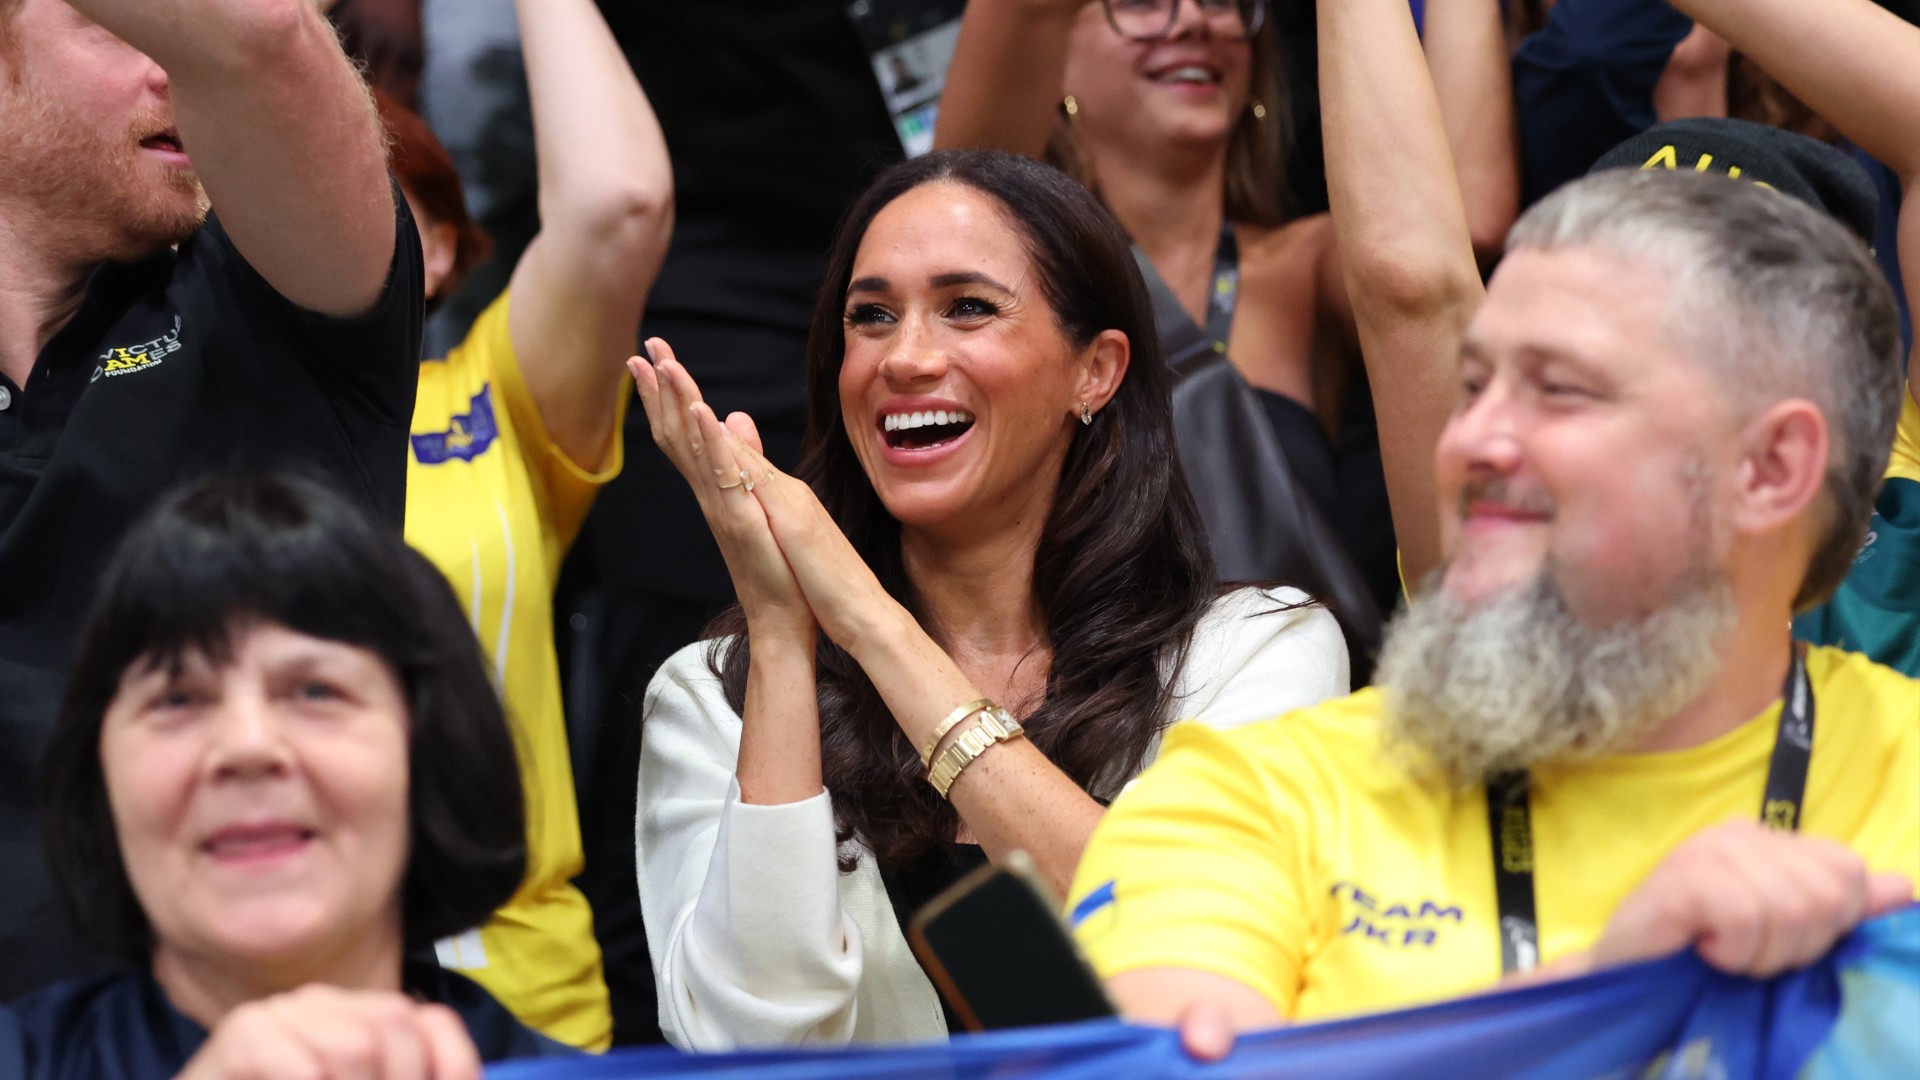 Meghan Markle's does down to earth Invictus Games style in Banana Republic  and J Crew